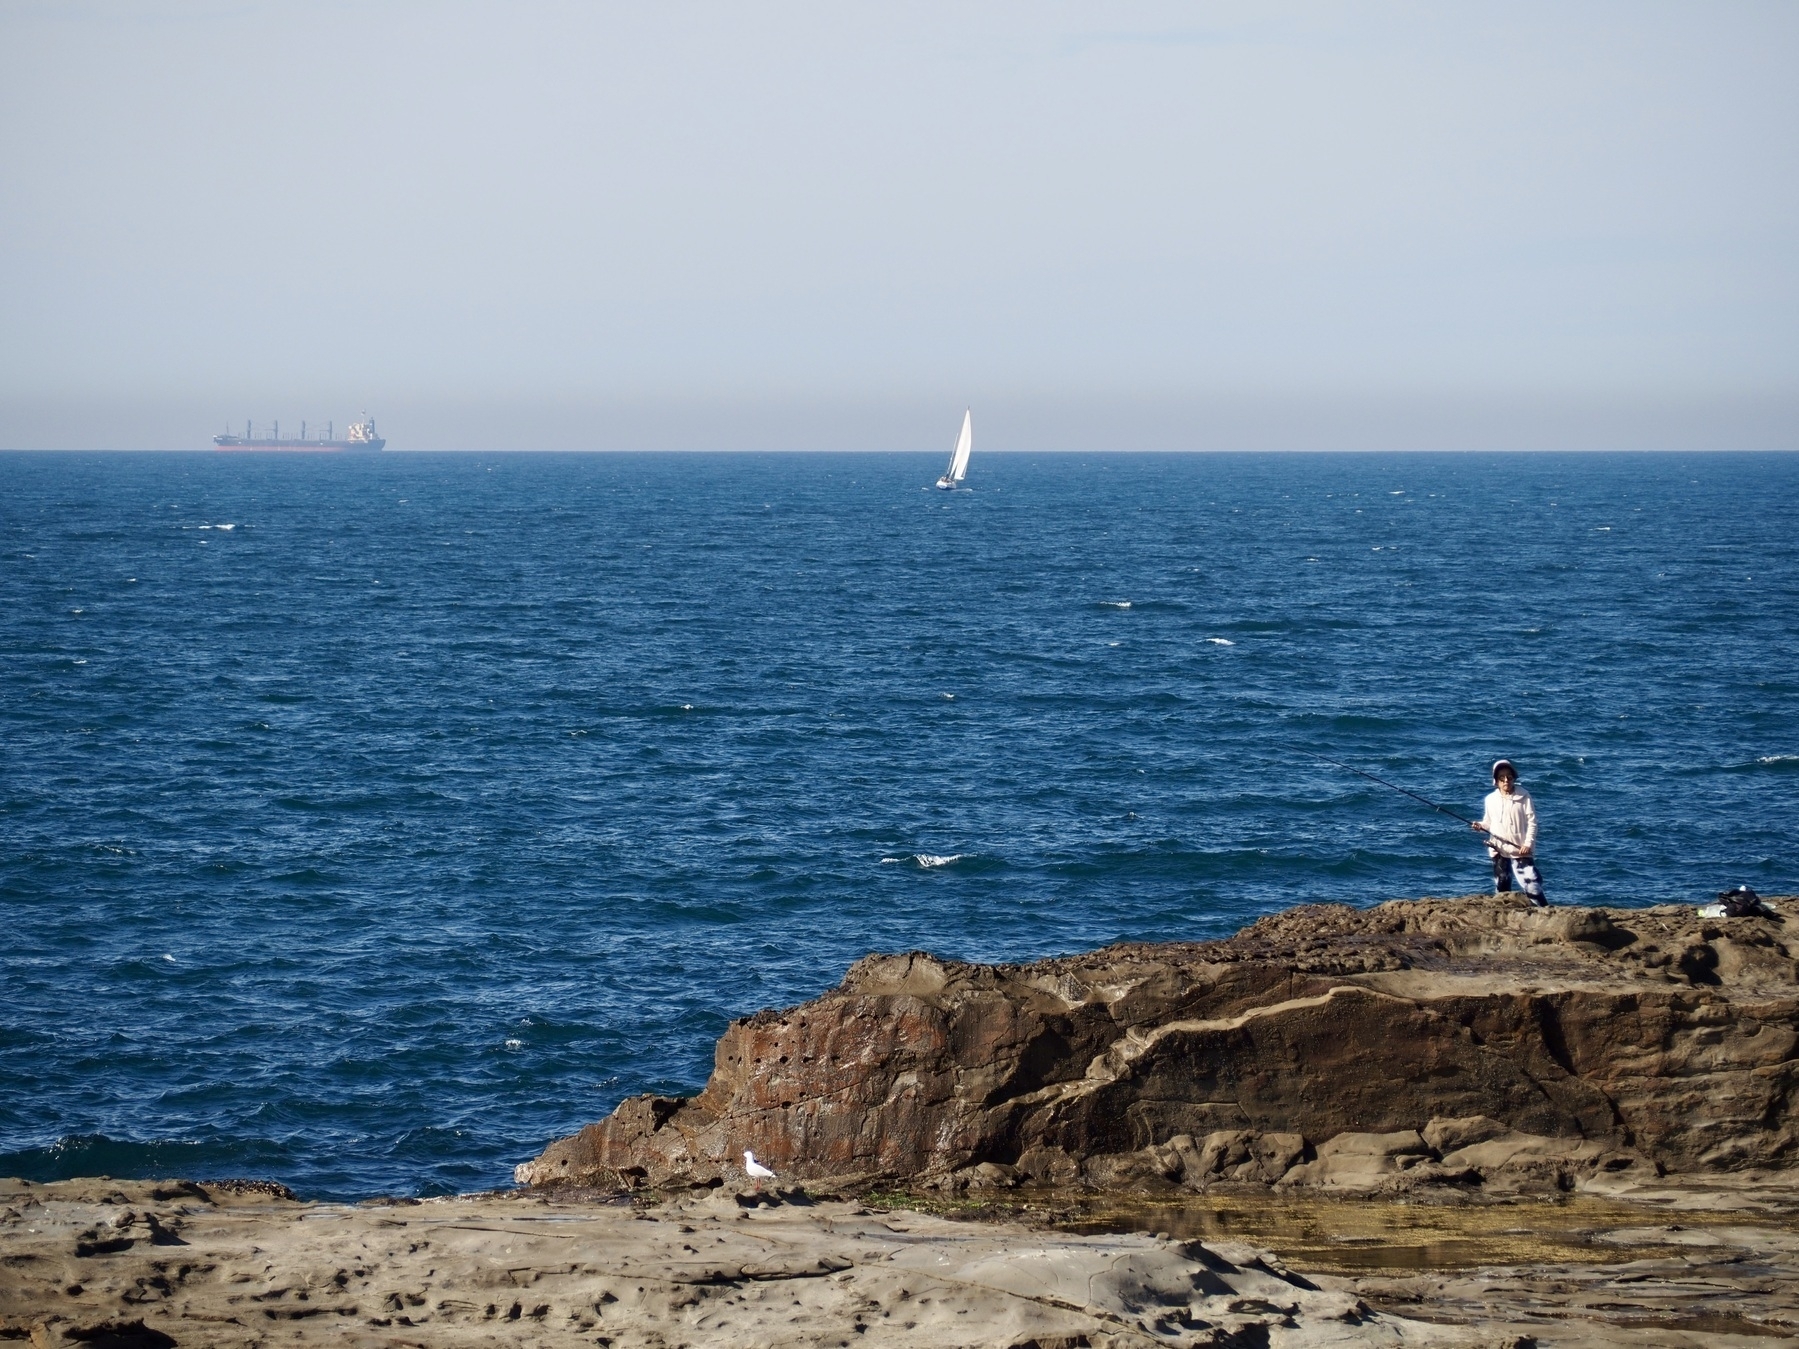 A person stands at the bottom-right of the frame on a rocky cliff, with a yacht and ship floating on the ocean in the distance.